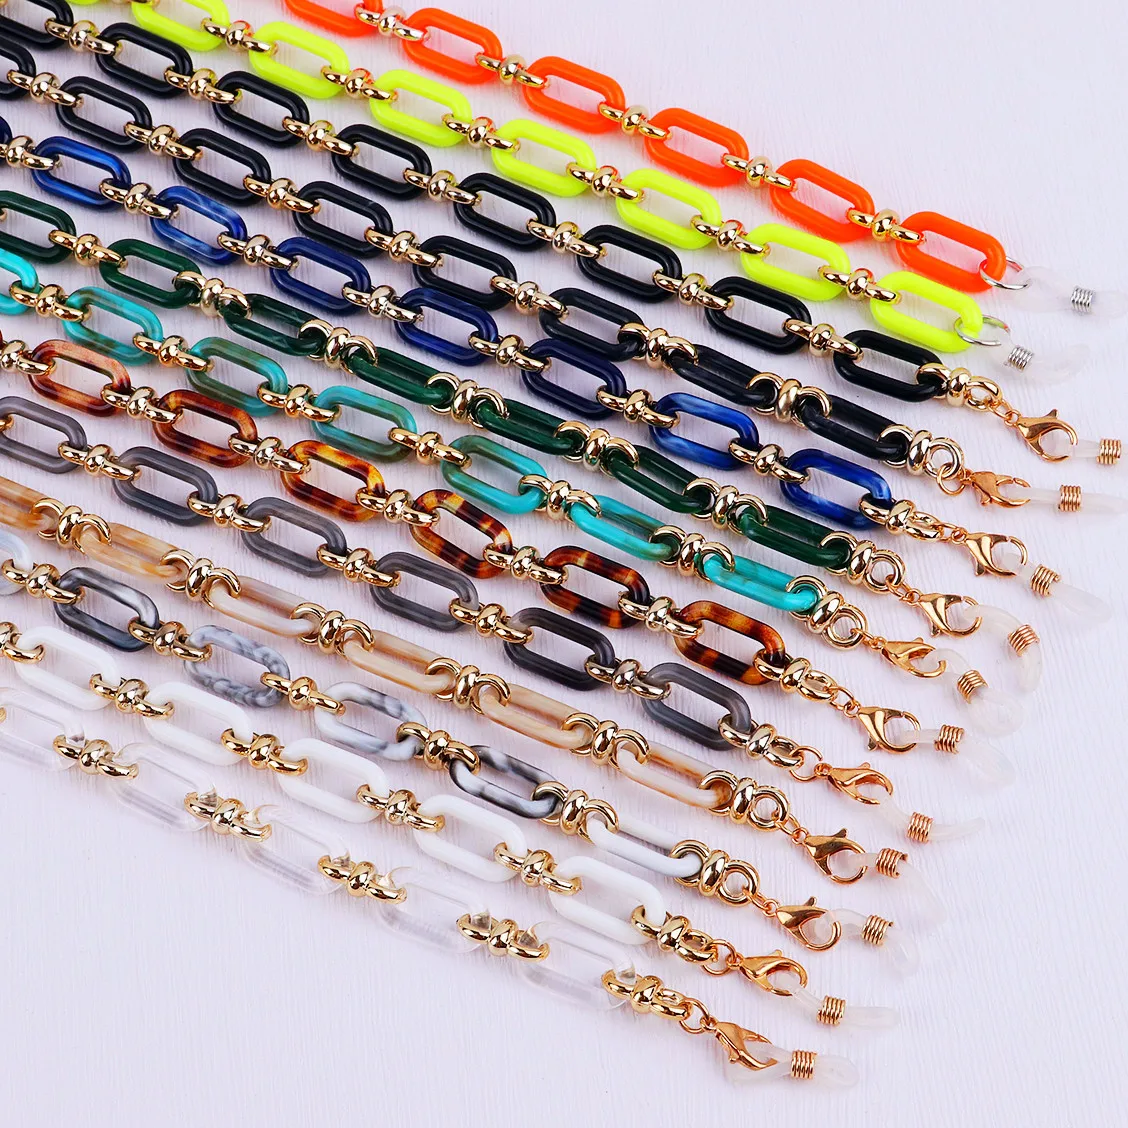 

2022 Fashion Neck Eyeglass Holder Reading Glasses Chain For Covers Gold Acrylic Sunglasses Chains Lanyard Accessories For Women